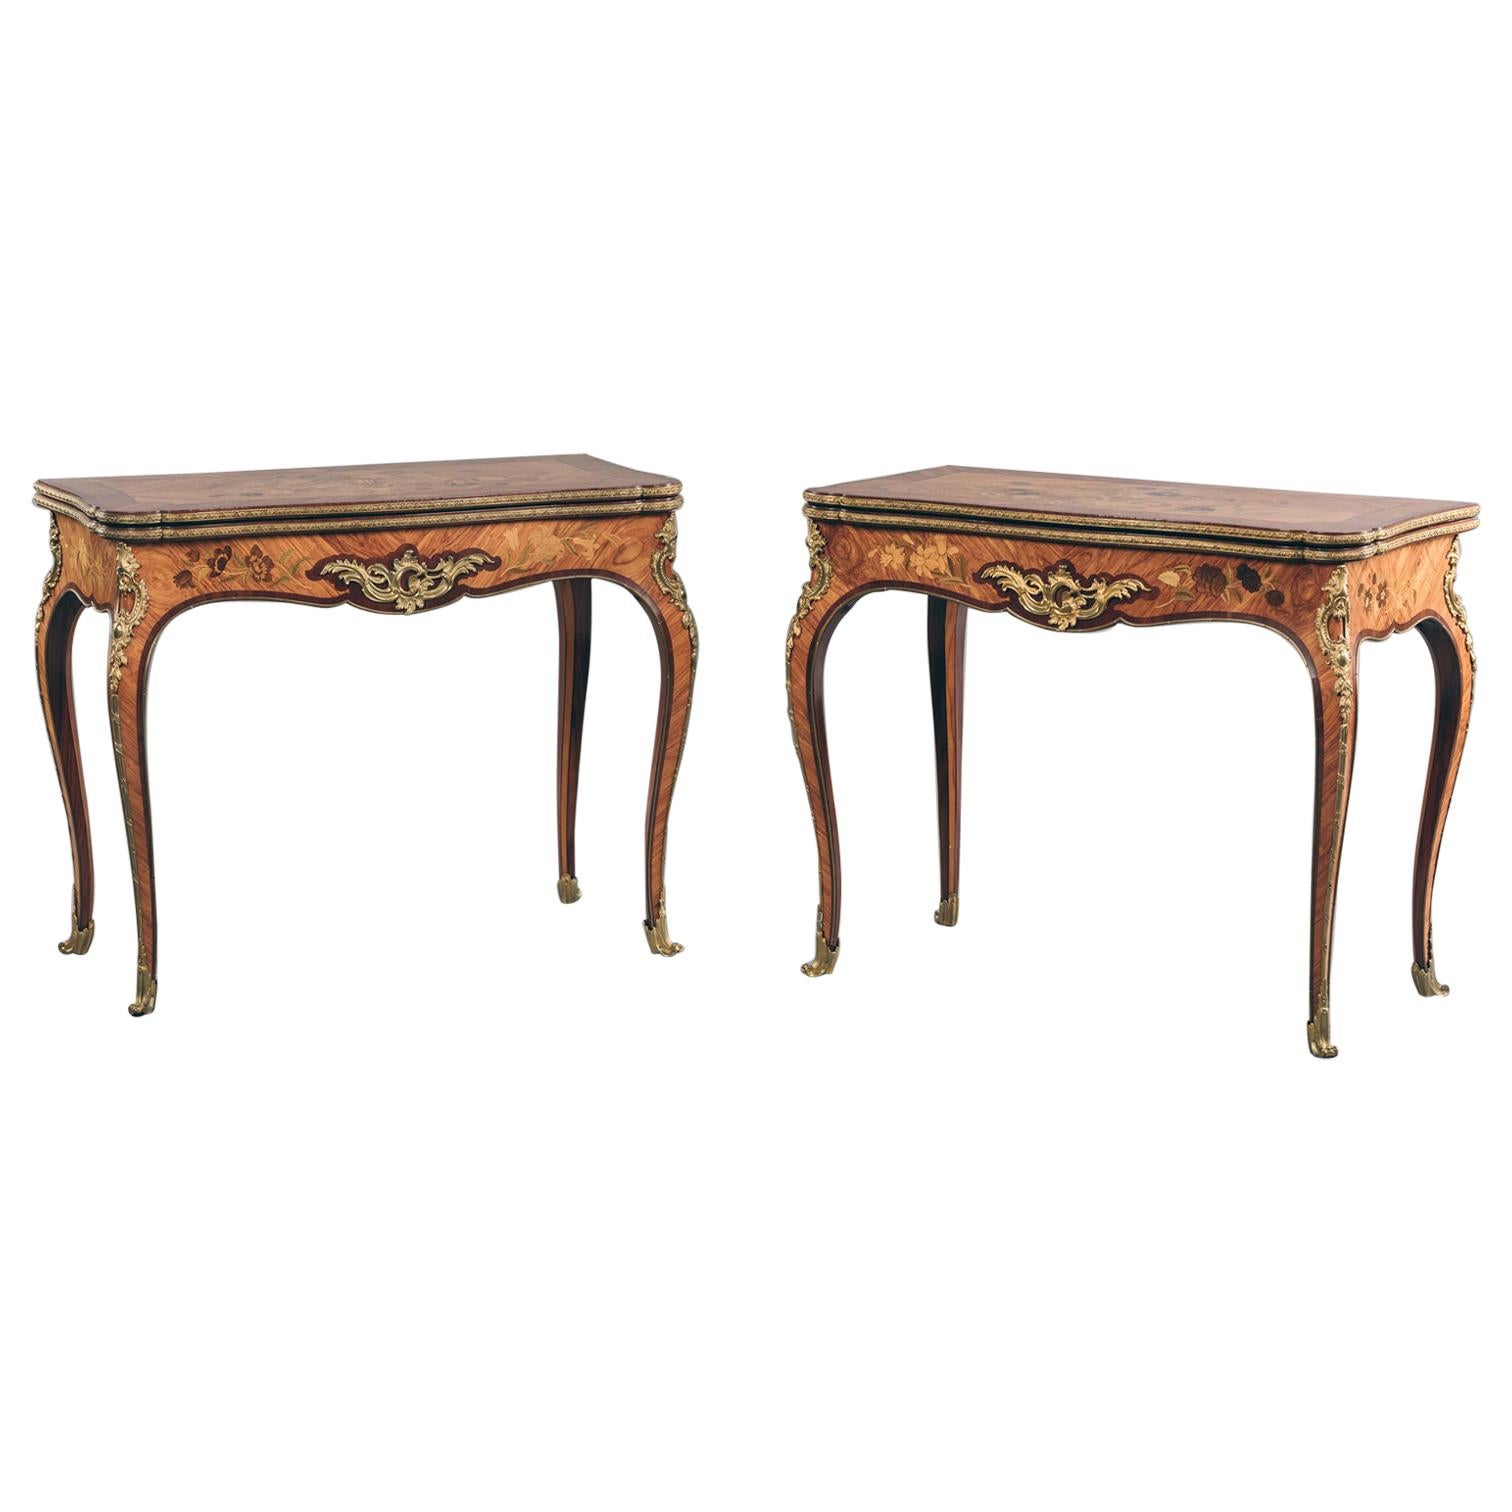 Pair of 19th Century French Louis XV Style Marquetry Inlaid Card Tables